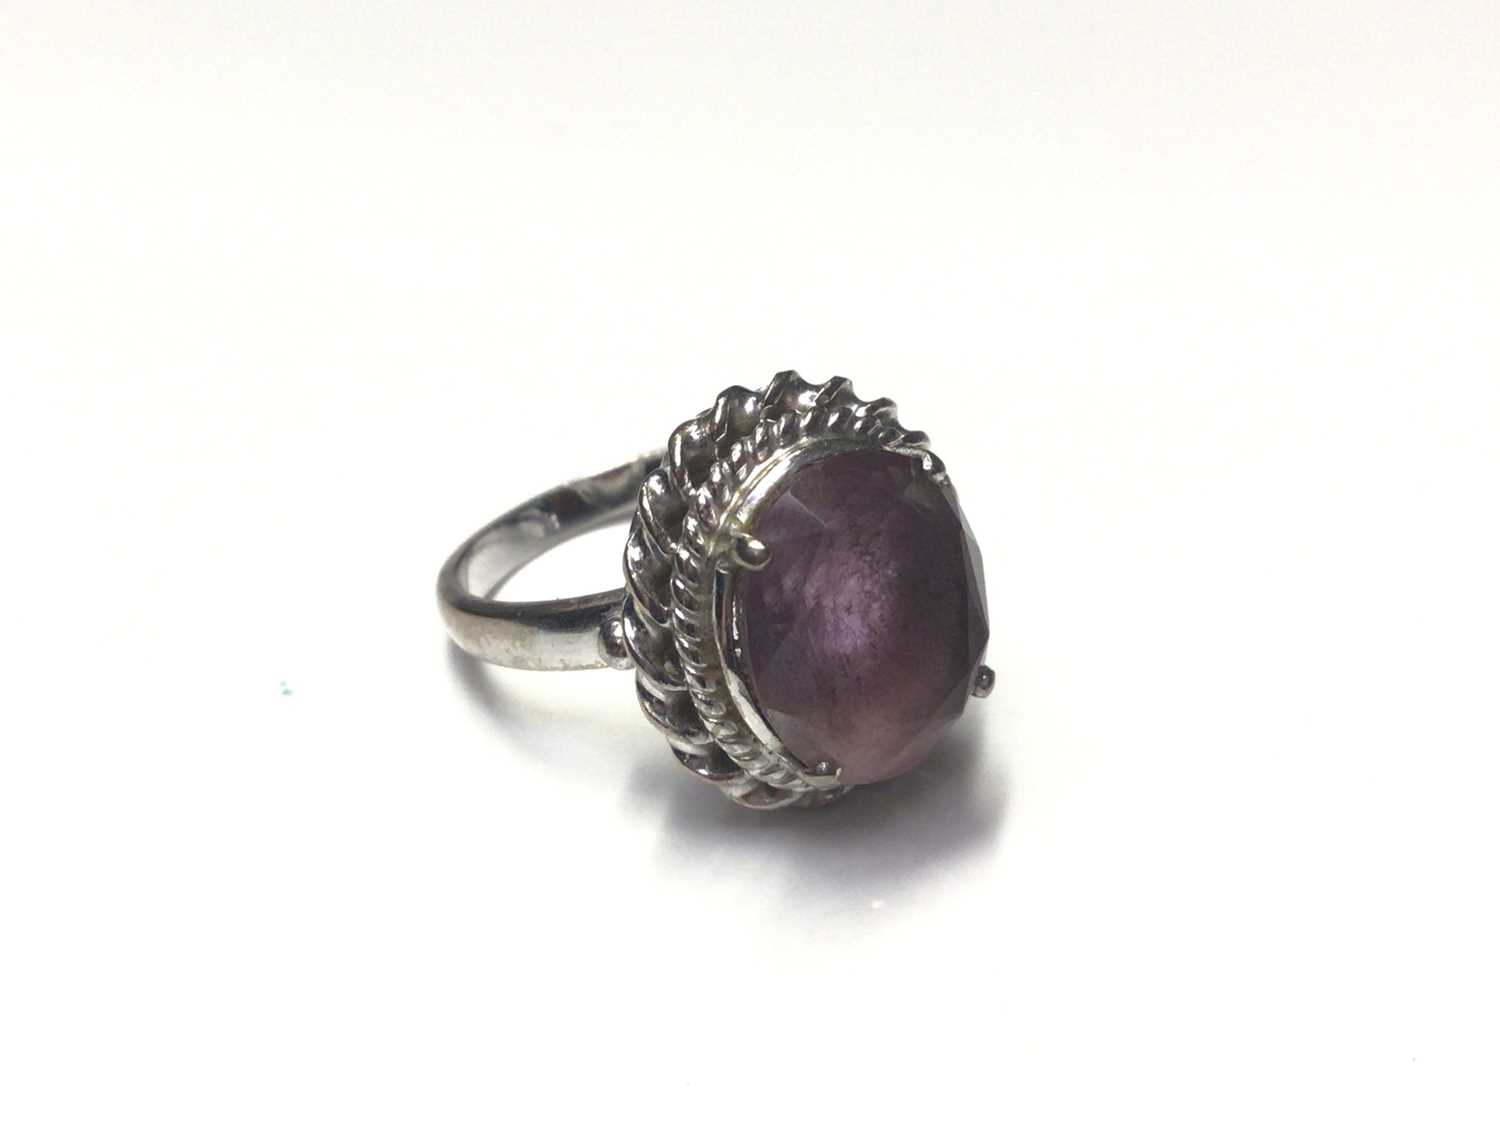 Lot 29 - White gold (stamped 585) purple stone cocktail ring